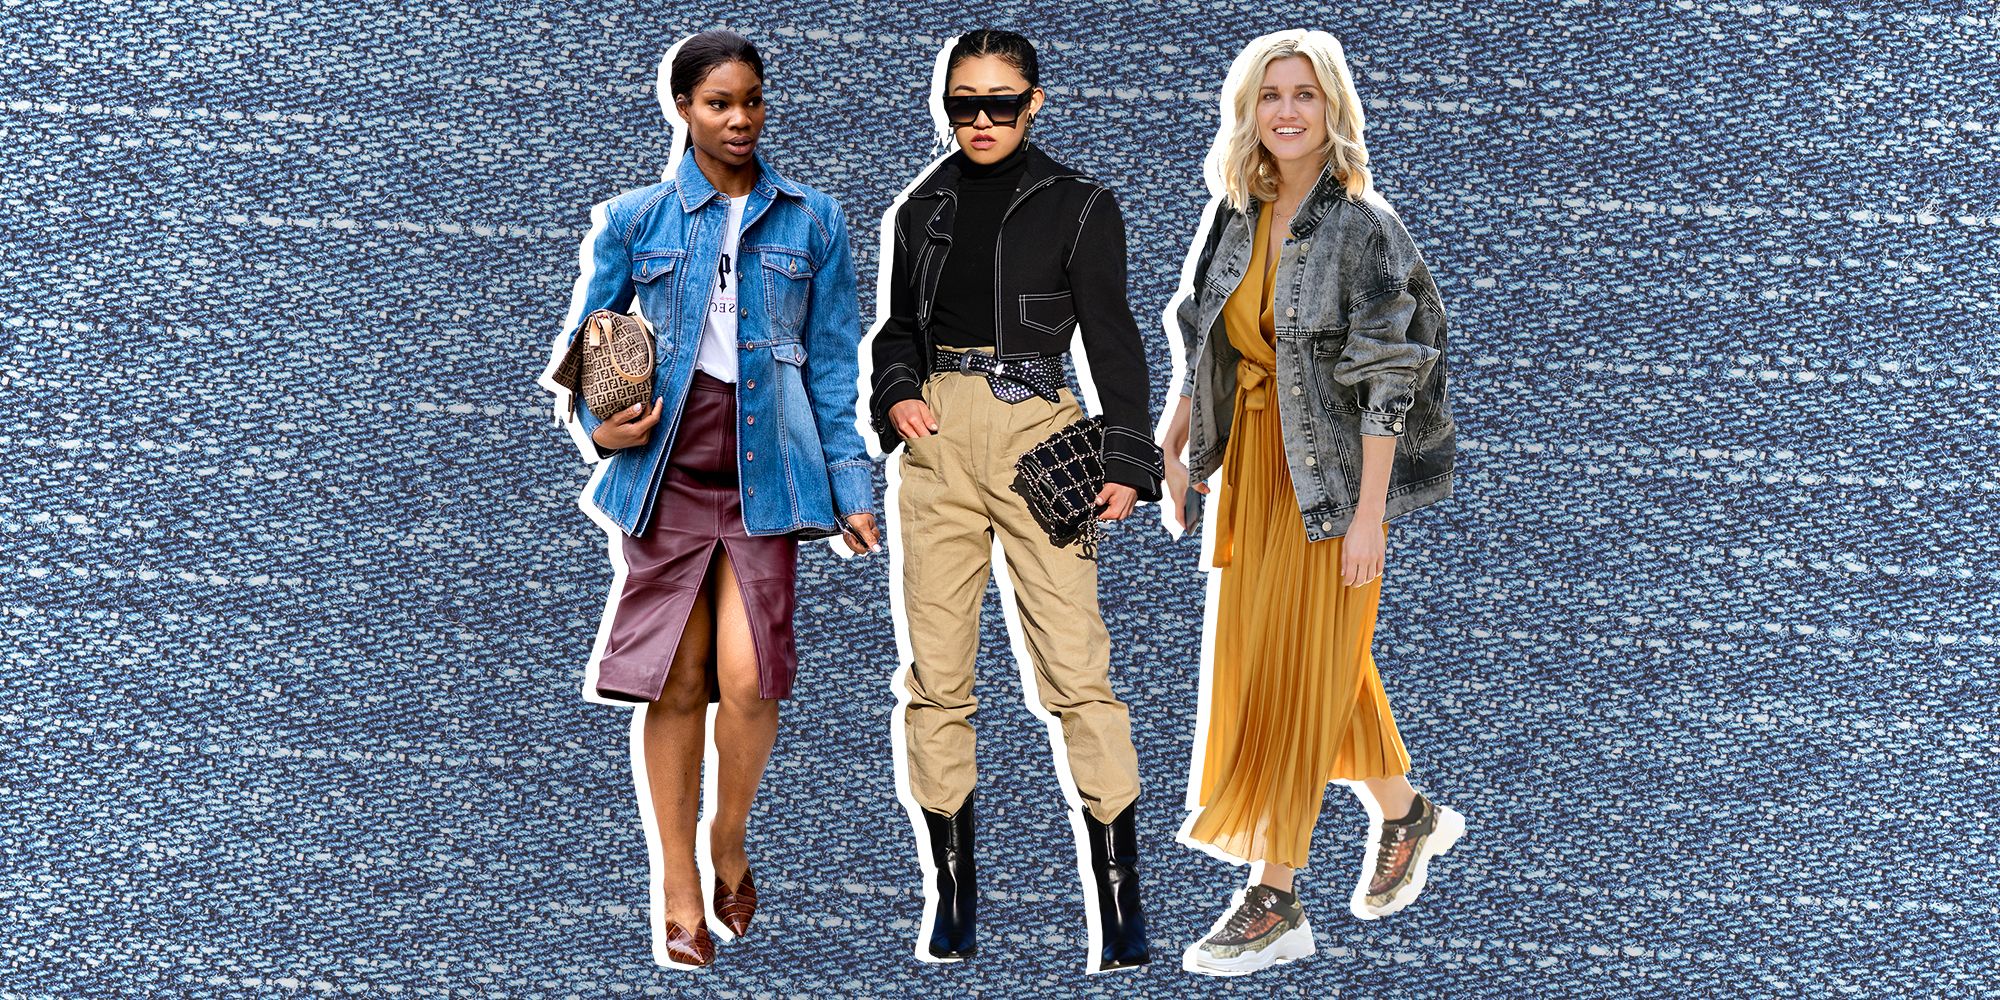 4 Cute Denim Jacket Outfits That Will Take You Through the Transitional  Season in Style - Lulus.com Fashion Blog